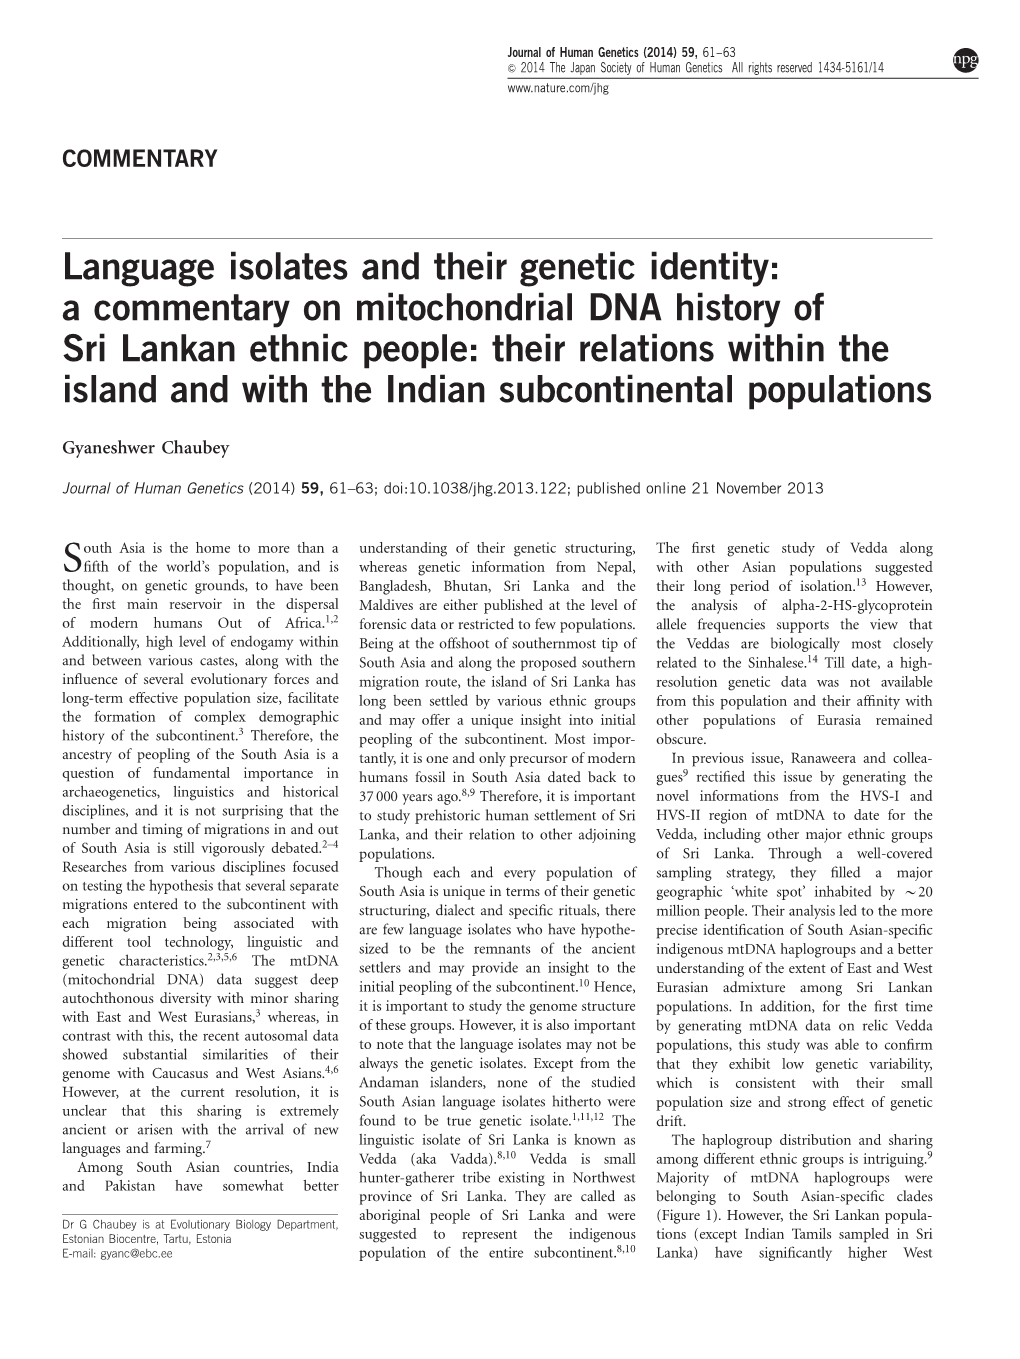 A Commentary on Mitochondrial DNA History of Sri Lankan Ethnic People: Their Relations Within the Island and with the Indian Subcontinental Populations